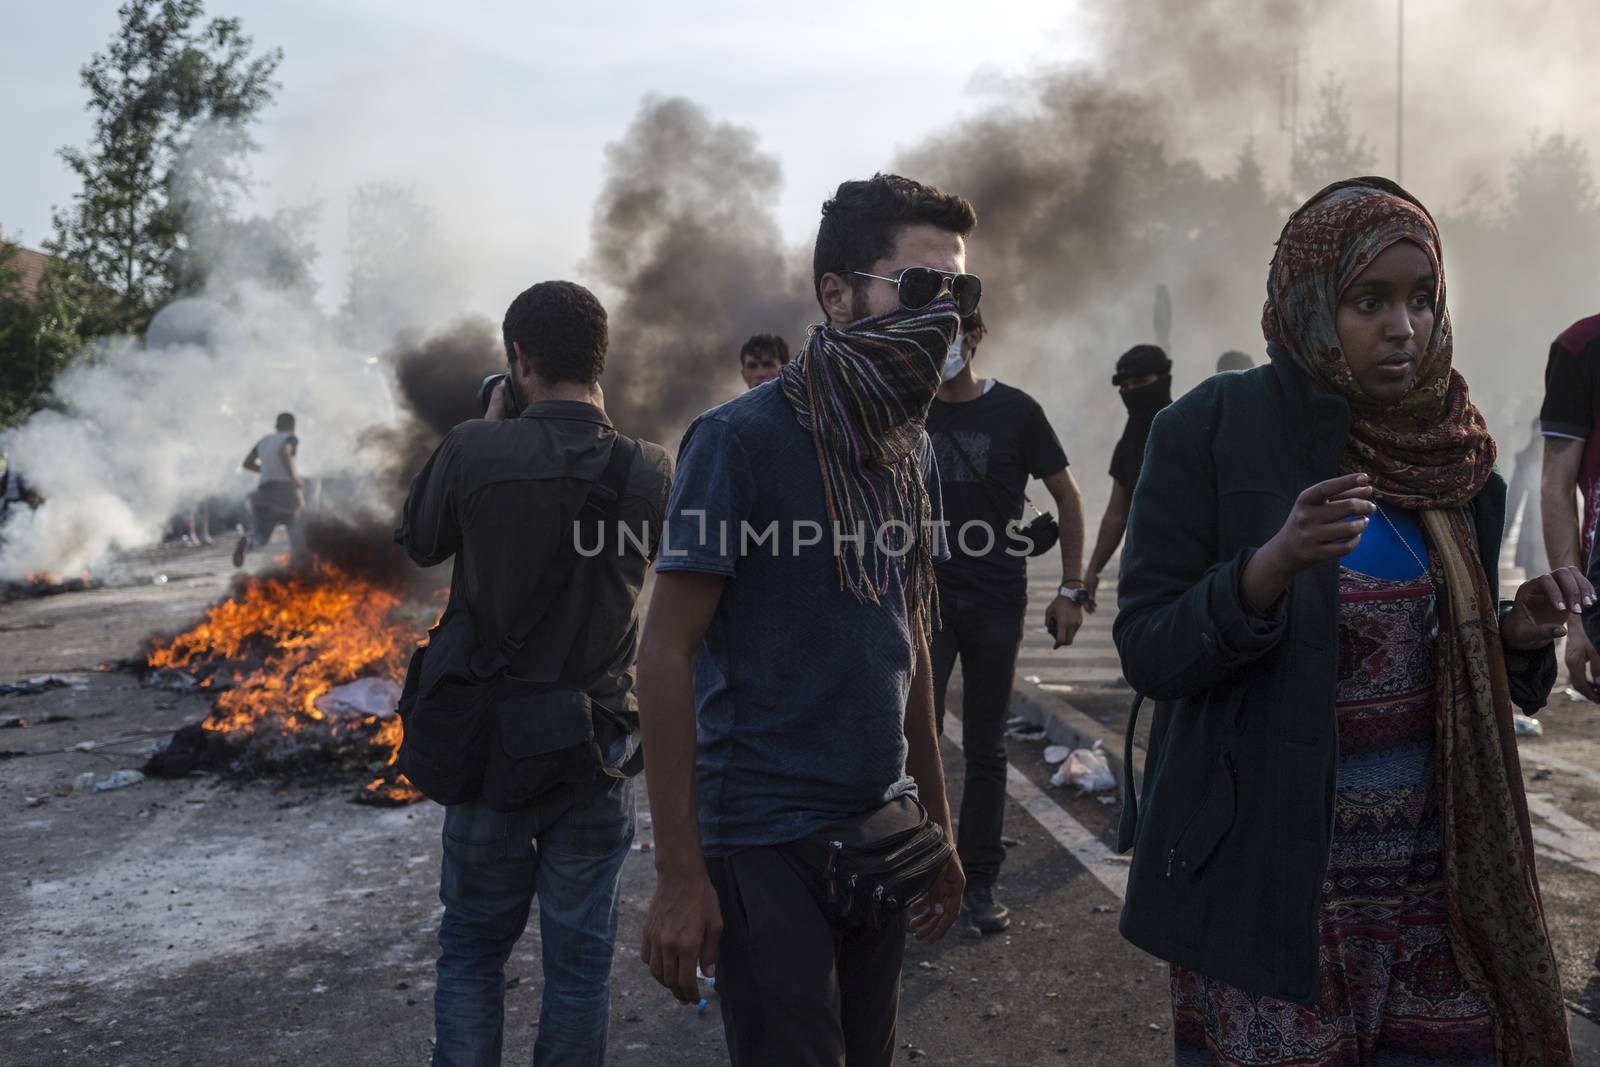 SERBIA, Horgos: Fires rage as Hungarian police fire tear gas and water cannons into the refugees in the Serbian border town of Horgos on September 16, 2015, after Hungary closed its border in an effort to stem the wave of refugees entering the country. ****Restriction: No Russia or Asia sales****